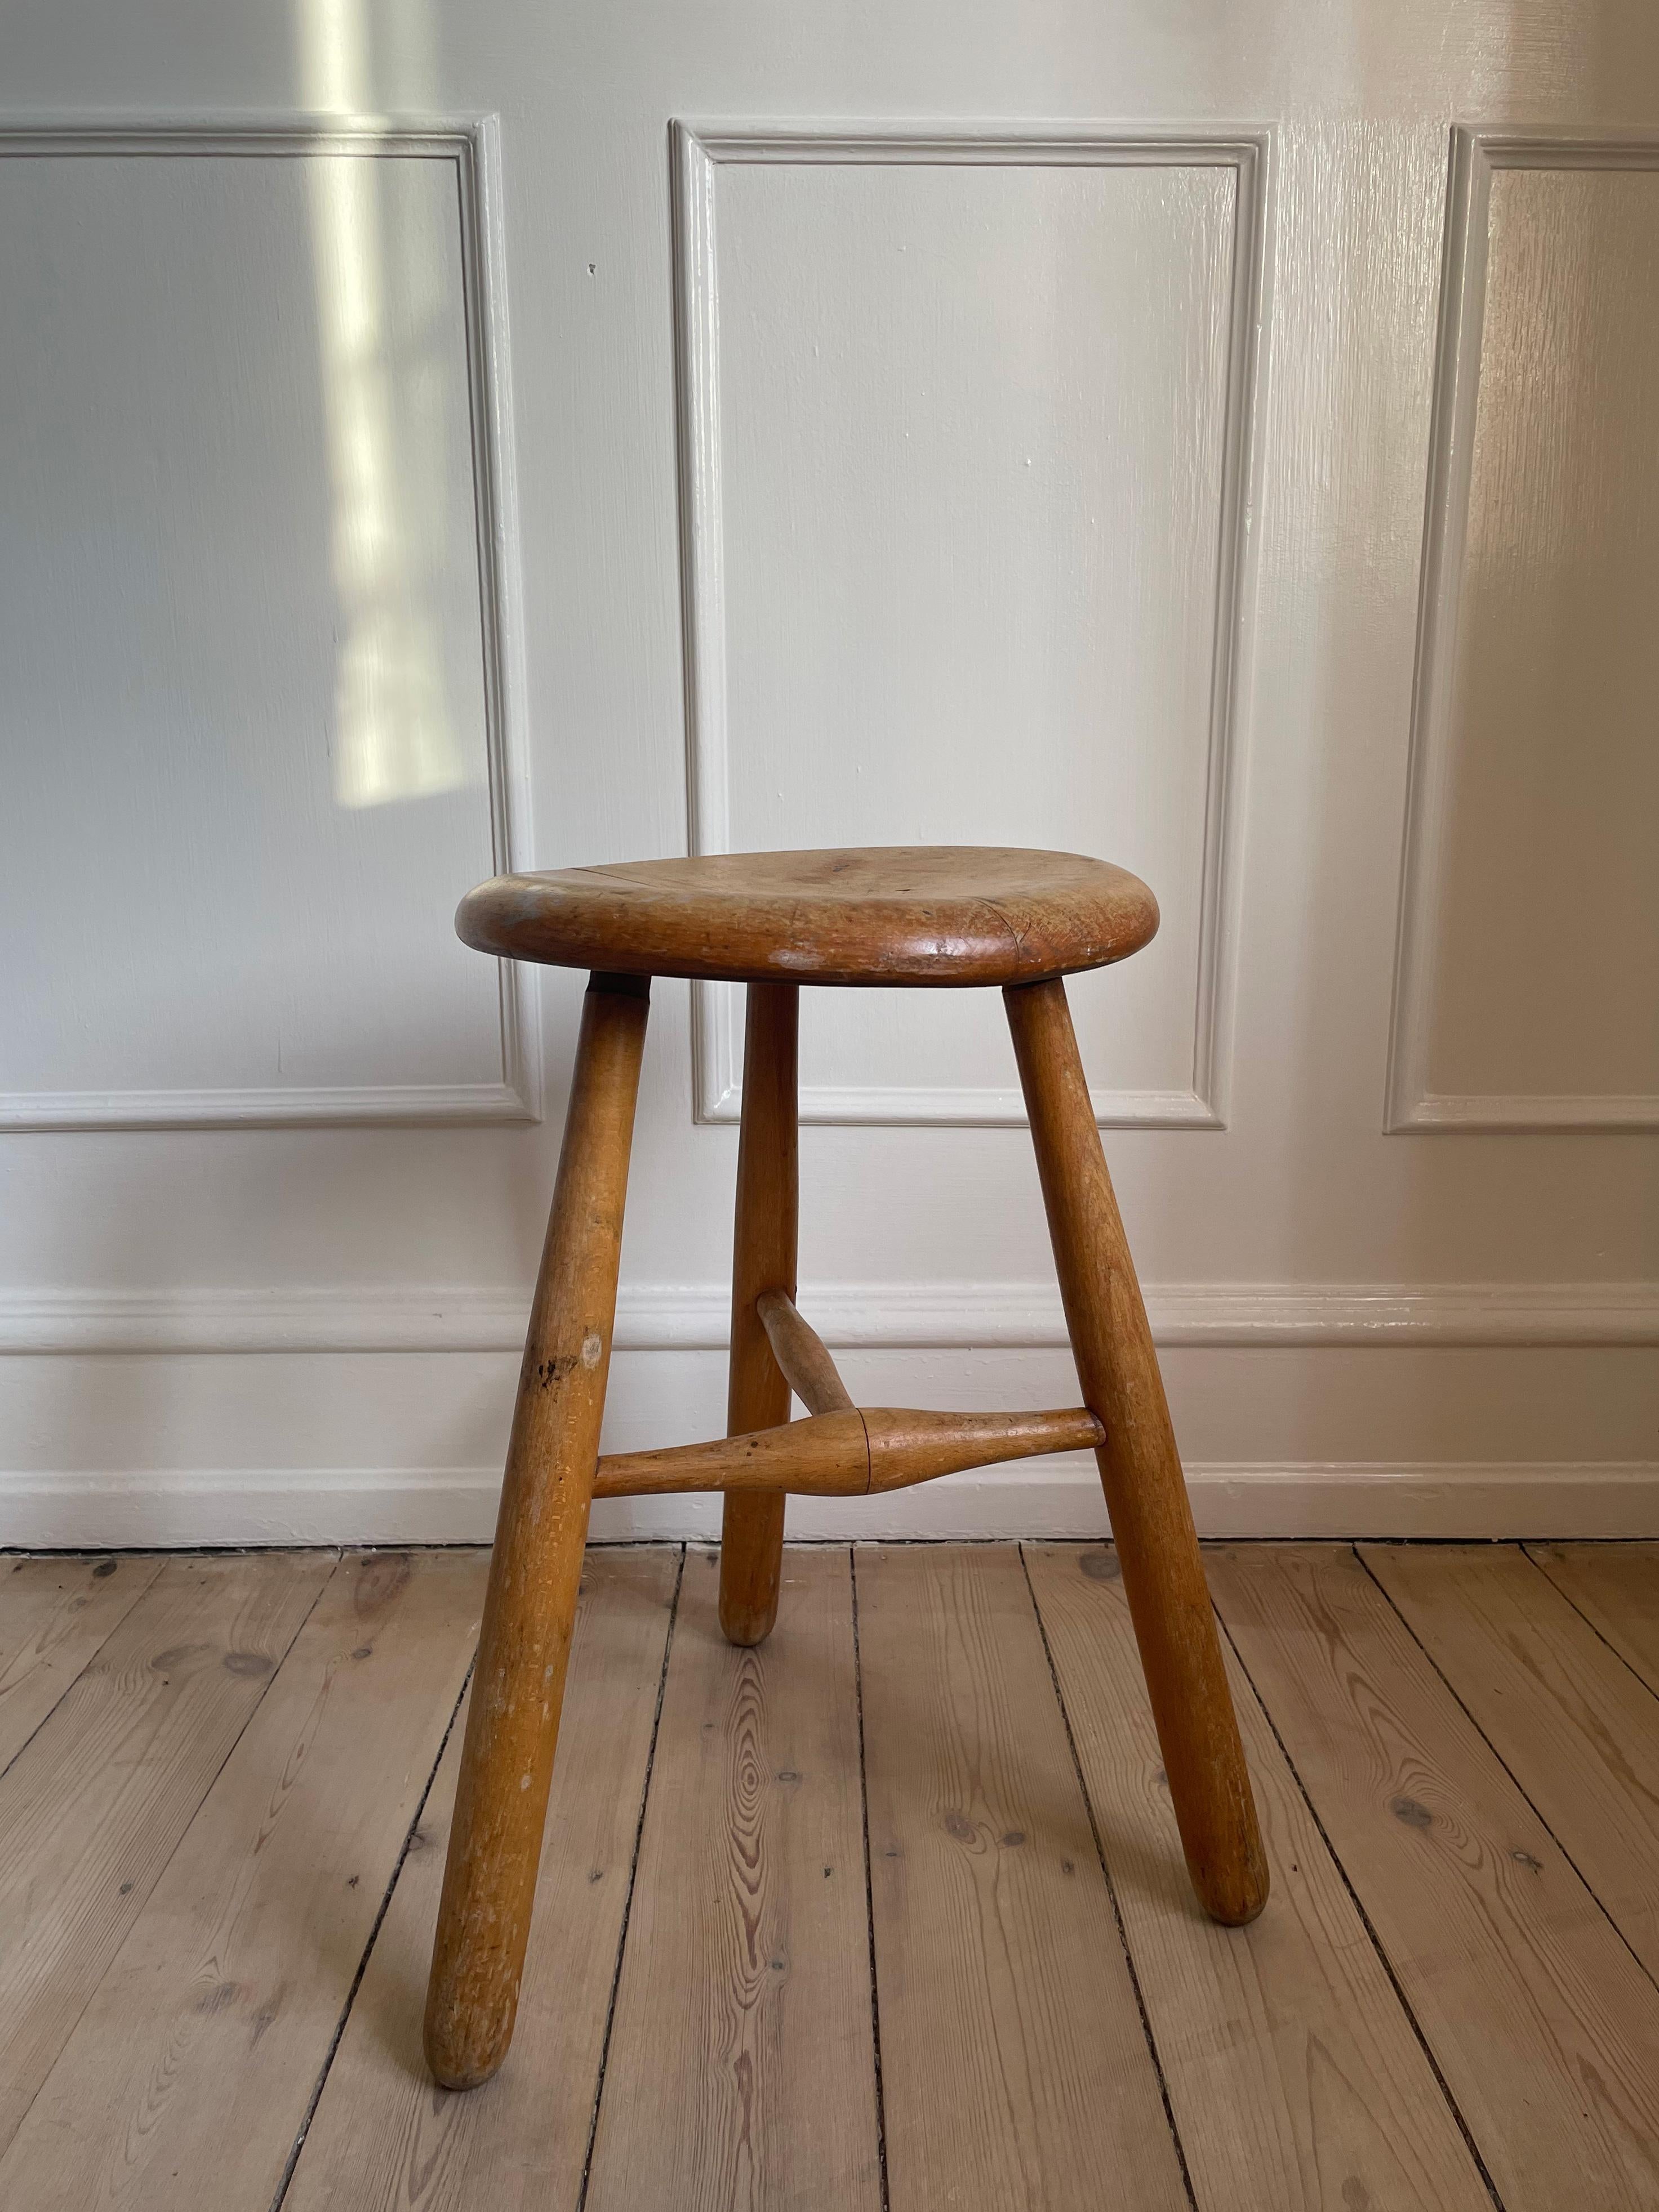 Rustic wooden bohemian style stool or side table with three legs. Fully stable with patina and signs of wear and age. Manufactured in Sweden in the 1950s.